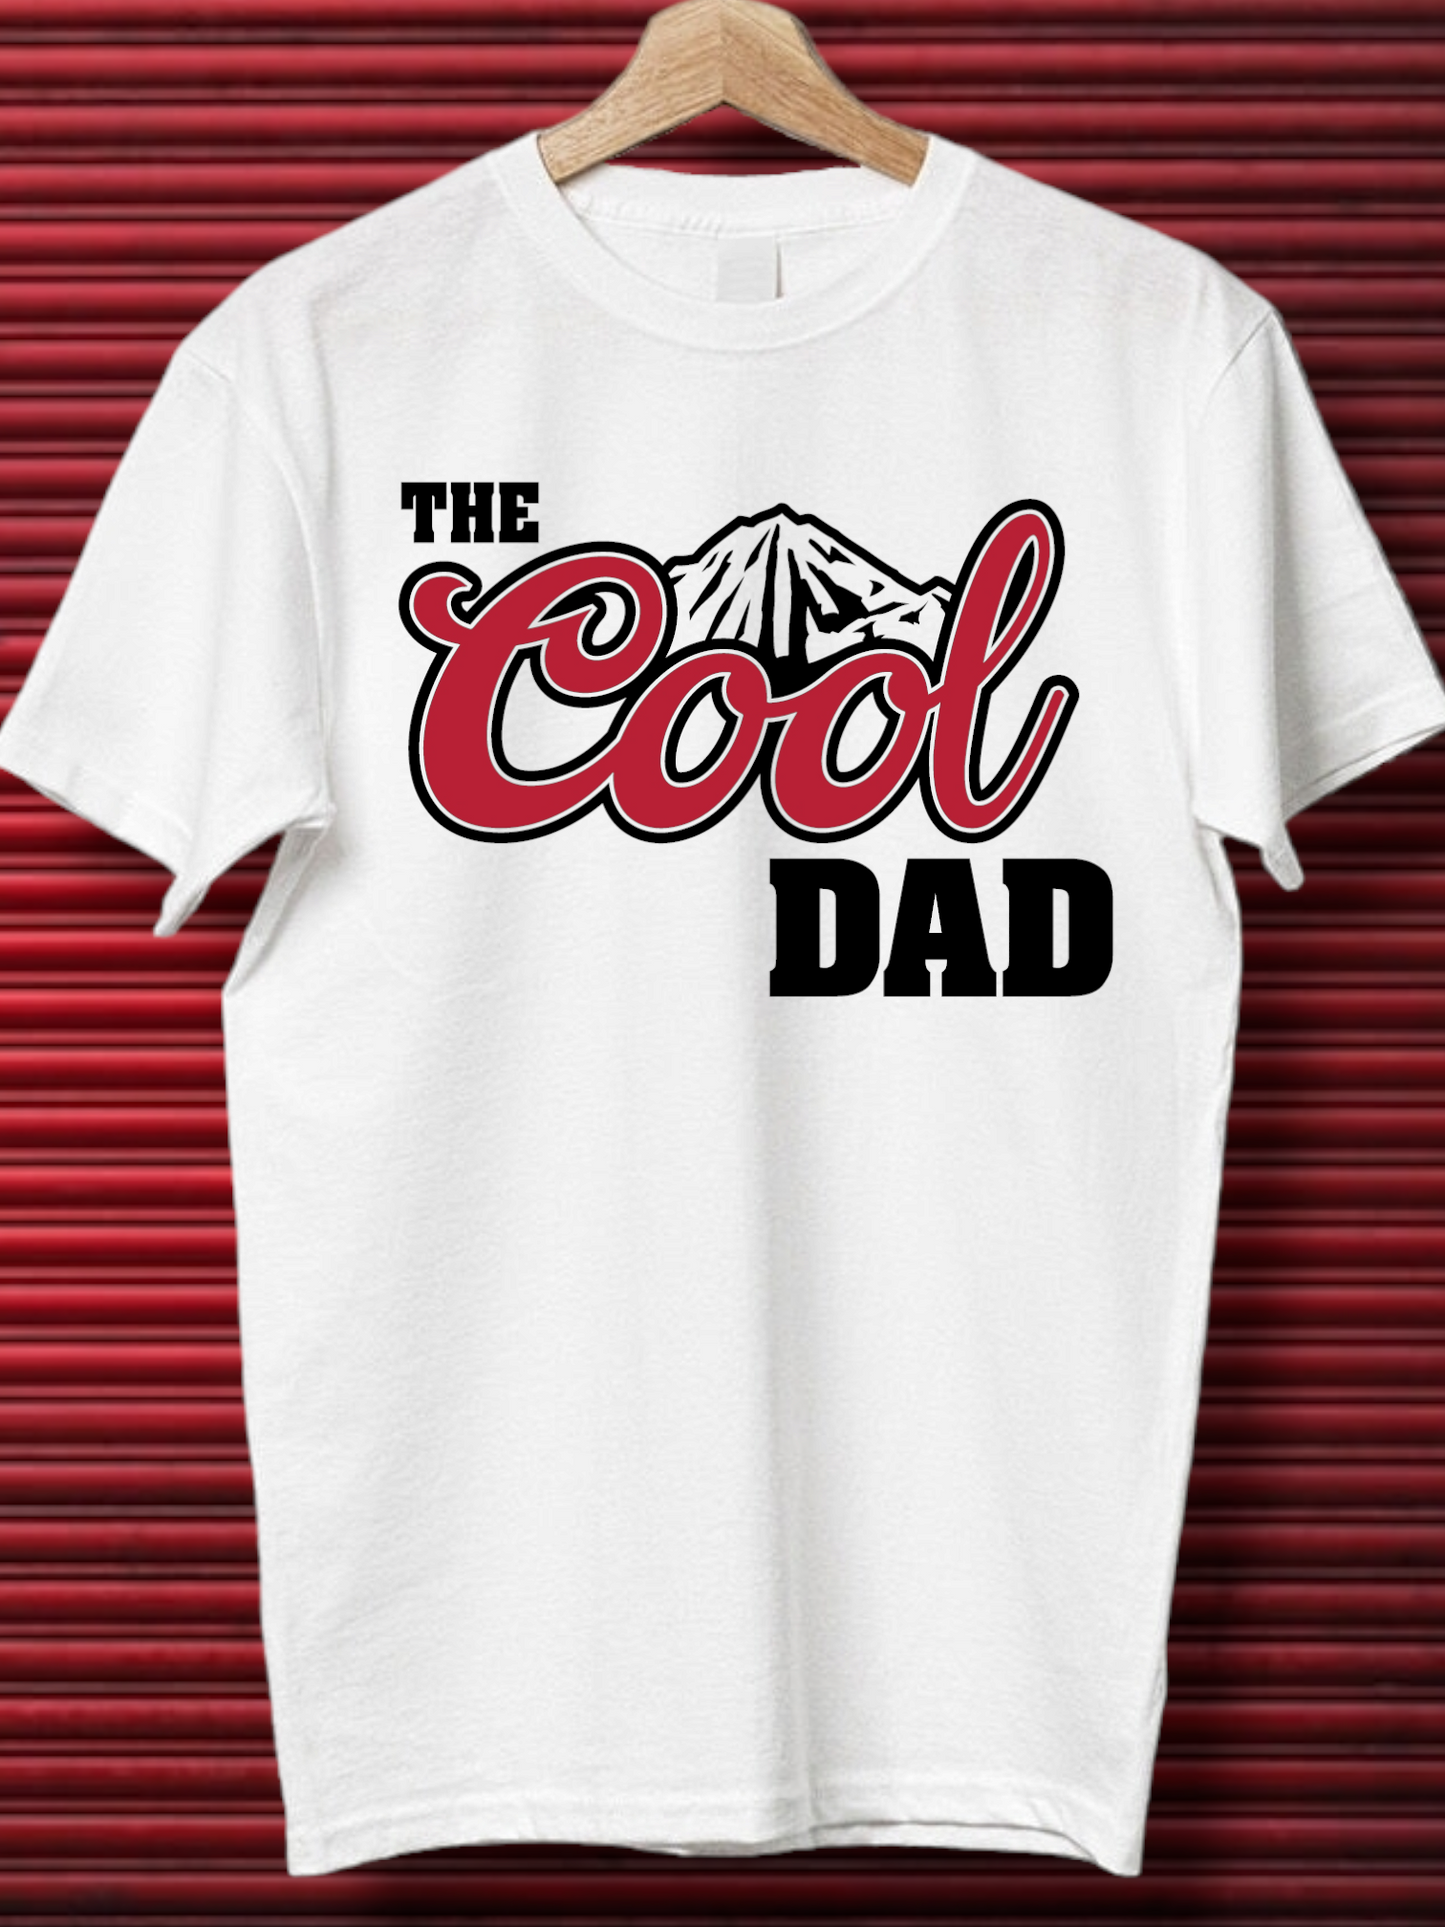 THE COOL DAD